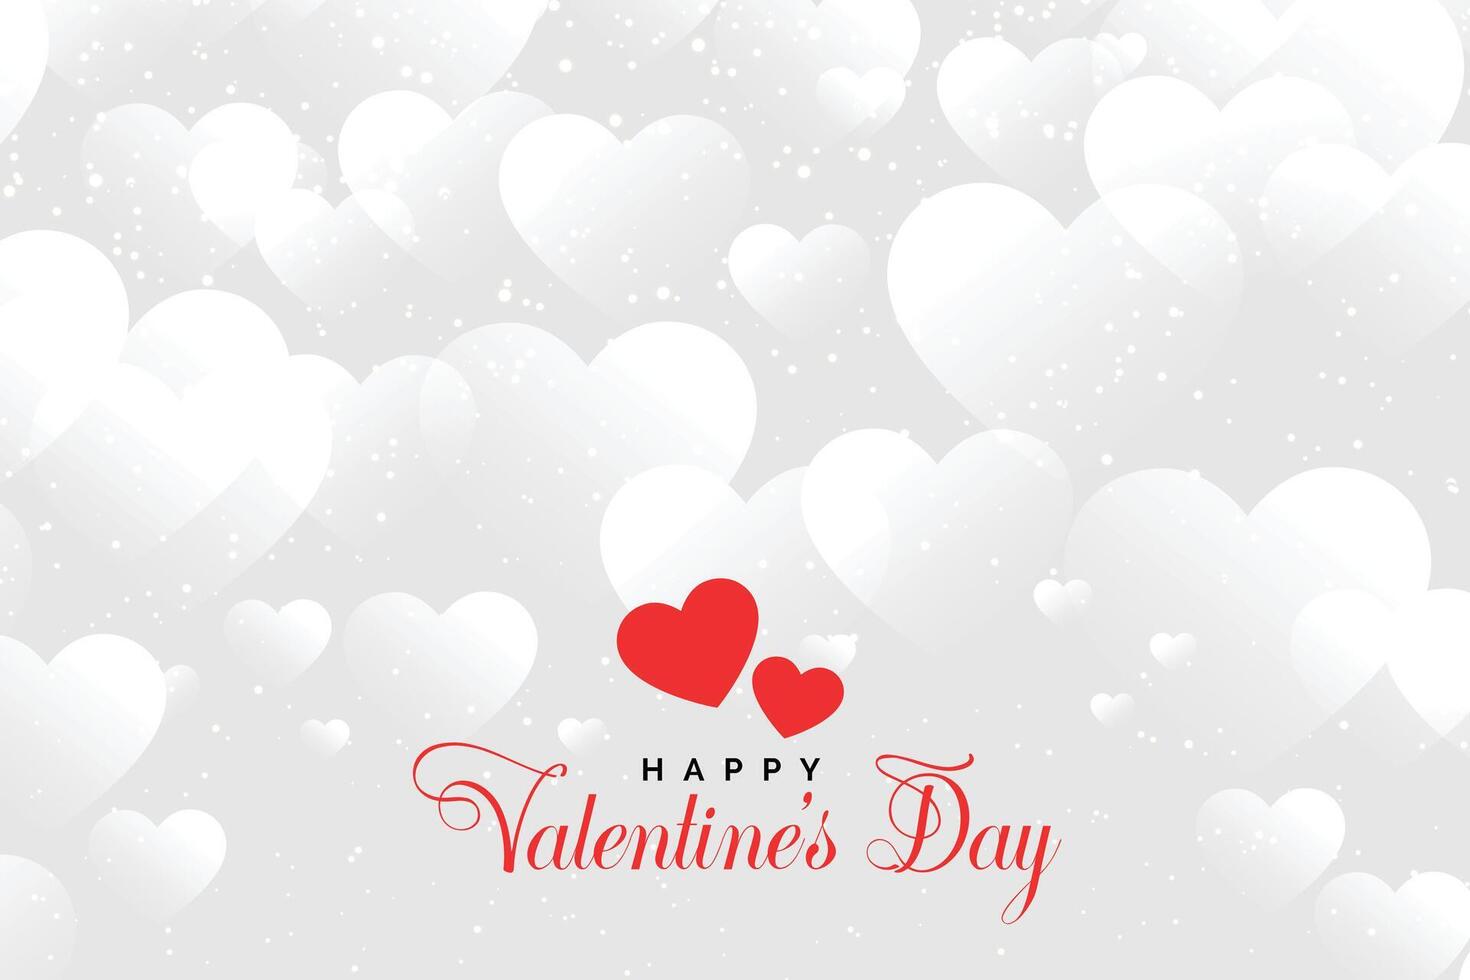 hearts cloud background for valentines day design vector